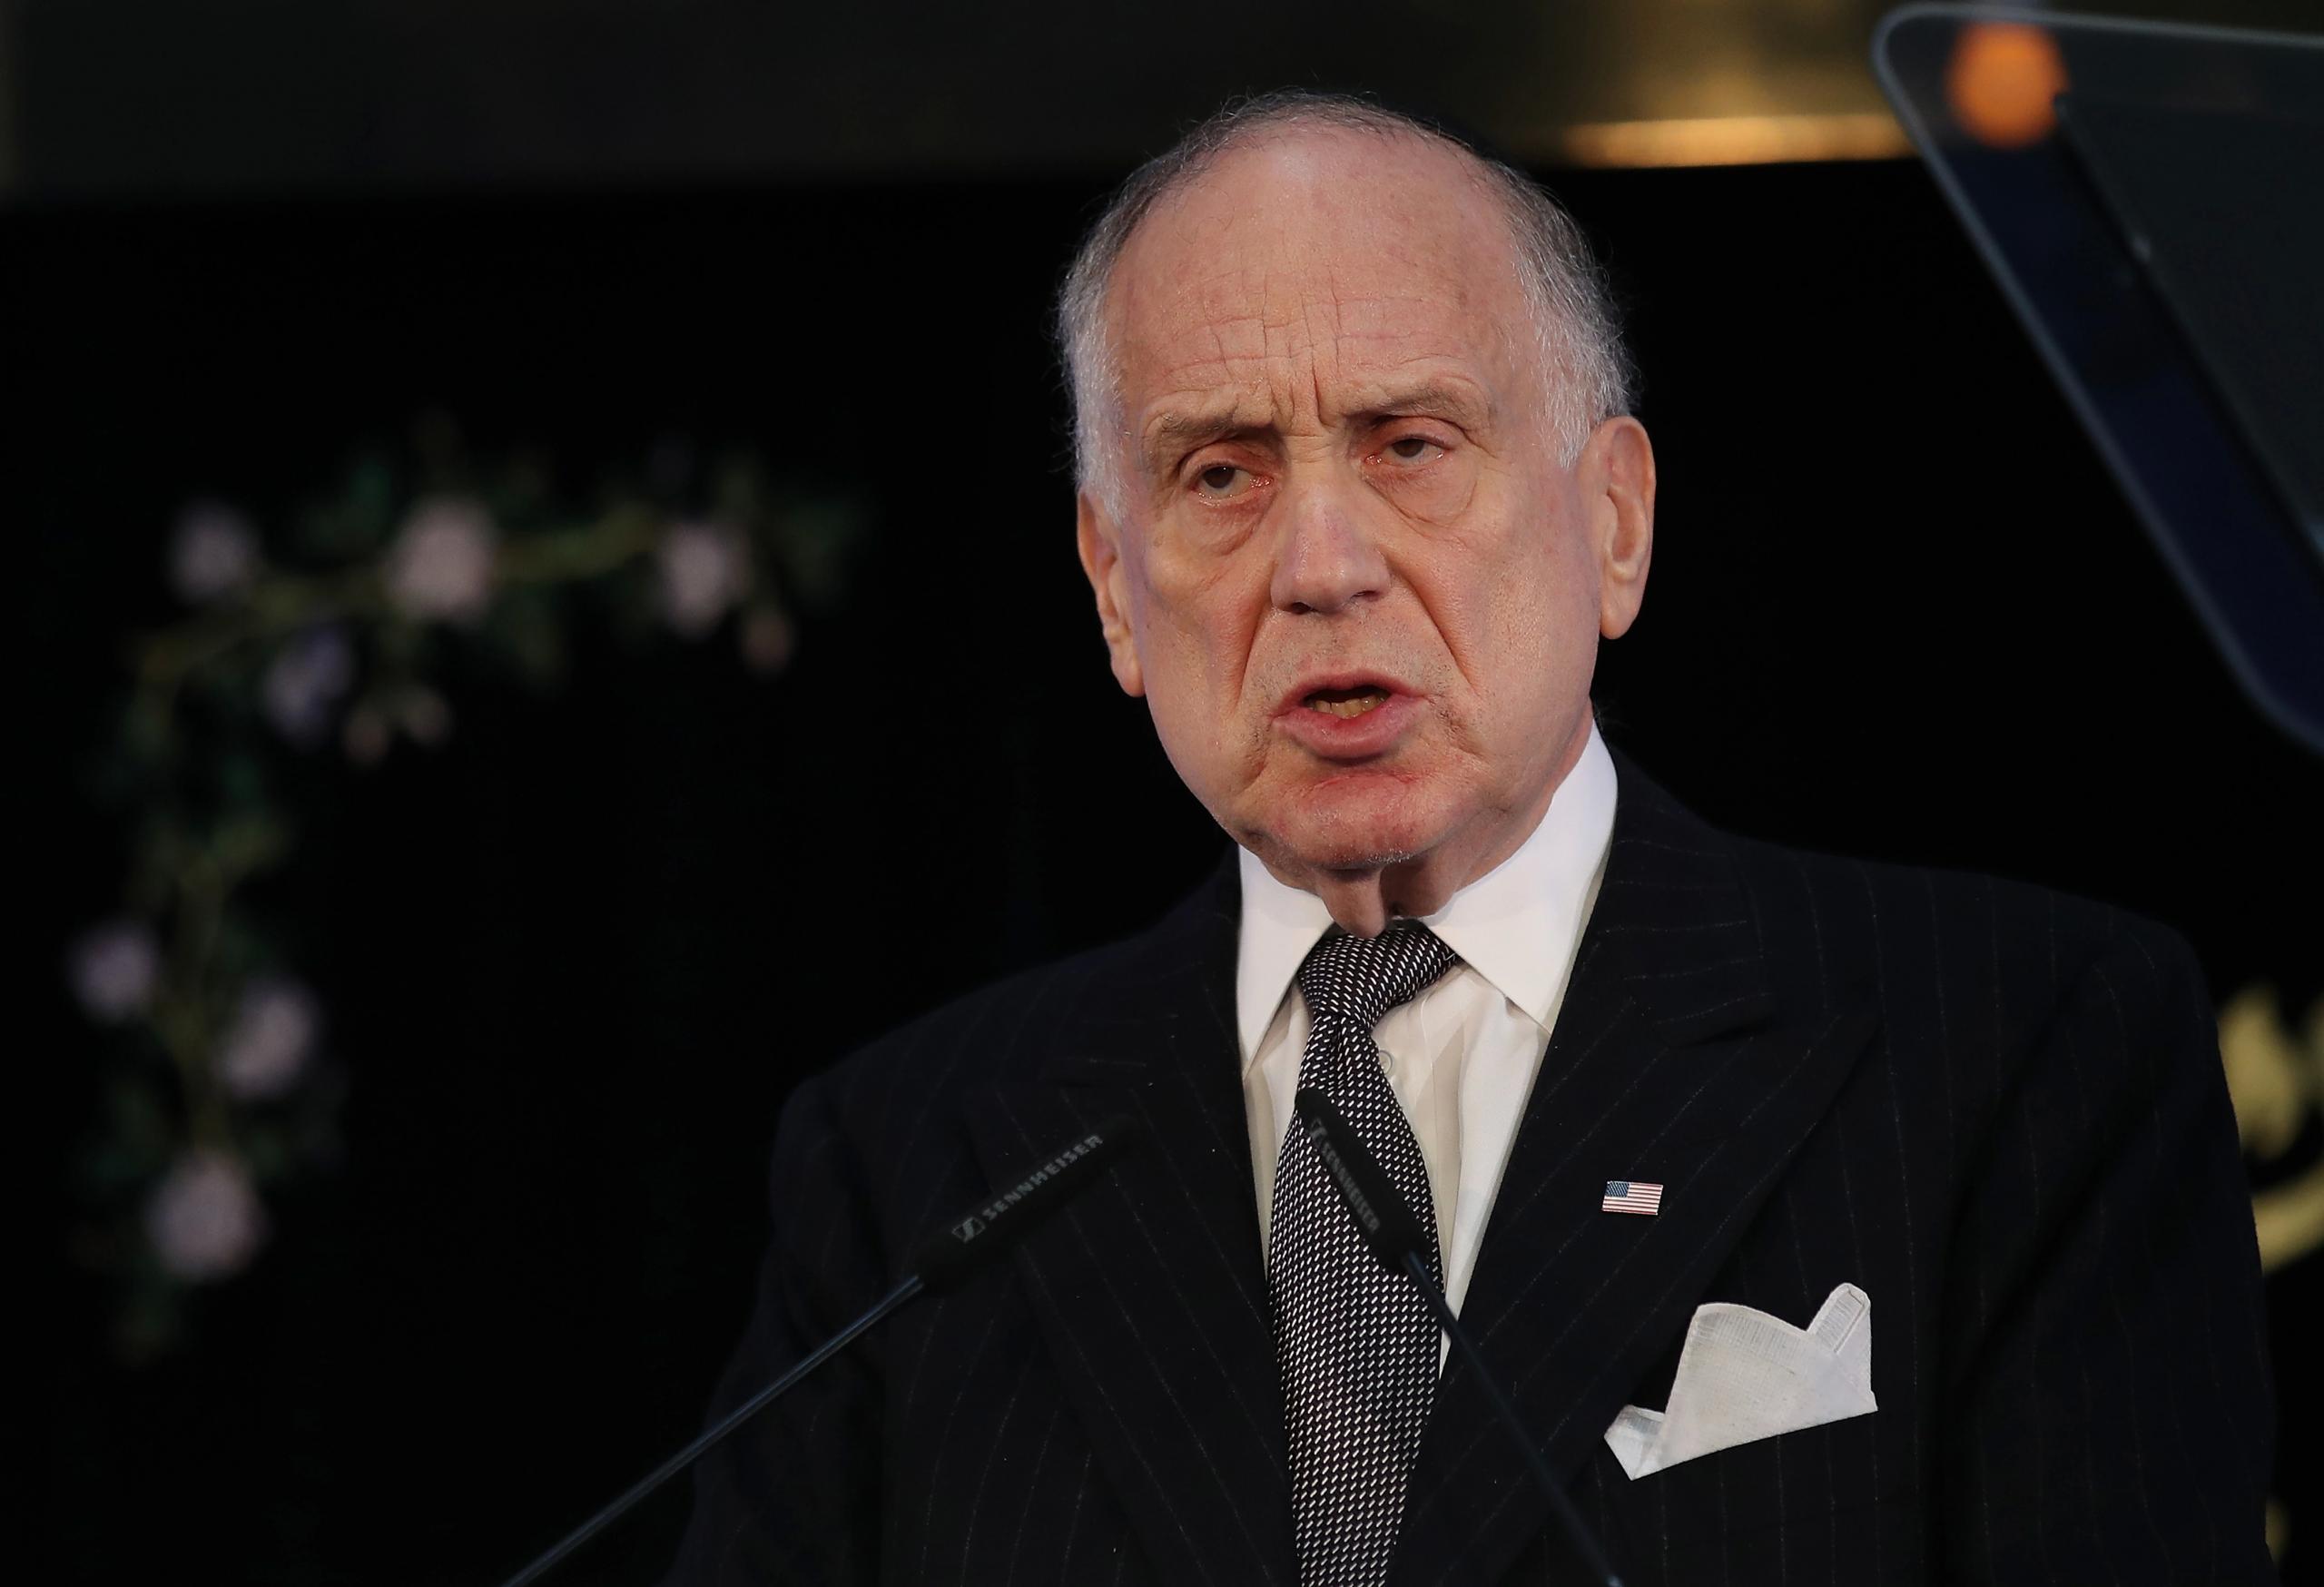 Collector Ronald Lauder Spends Big on N.Y. Governor’s Race, Japanese Museums Hike Ticket Prices on Some Shows, and More: Morning Links for November 7,2022